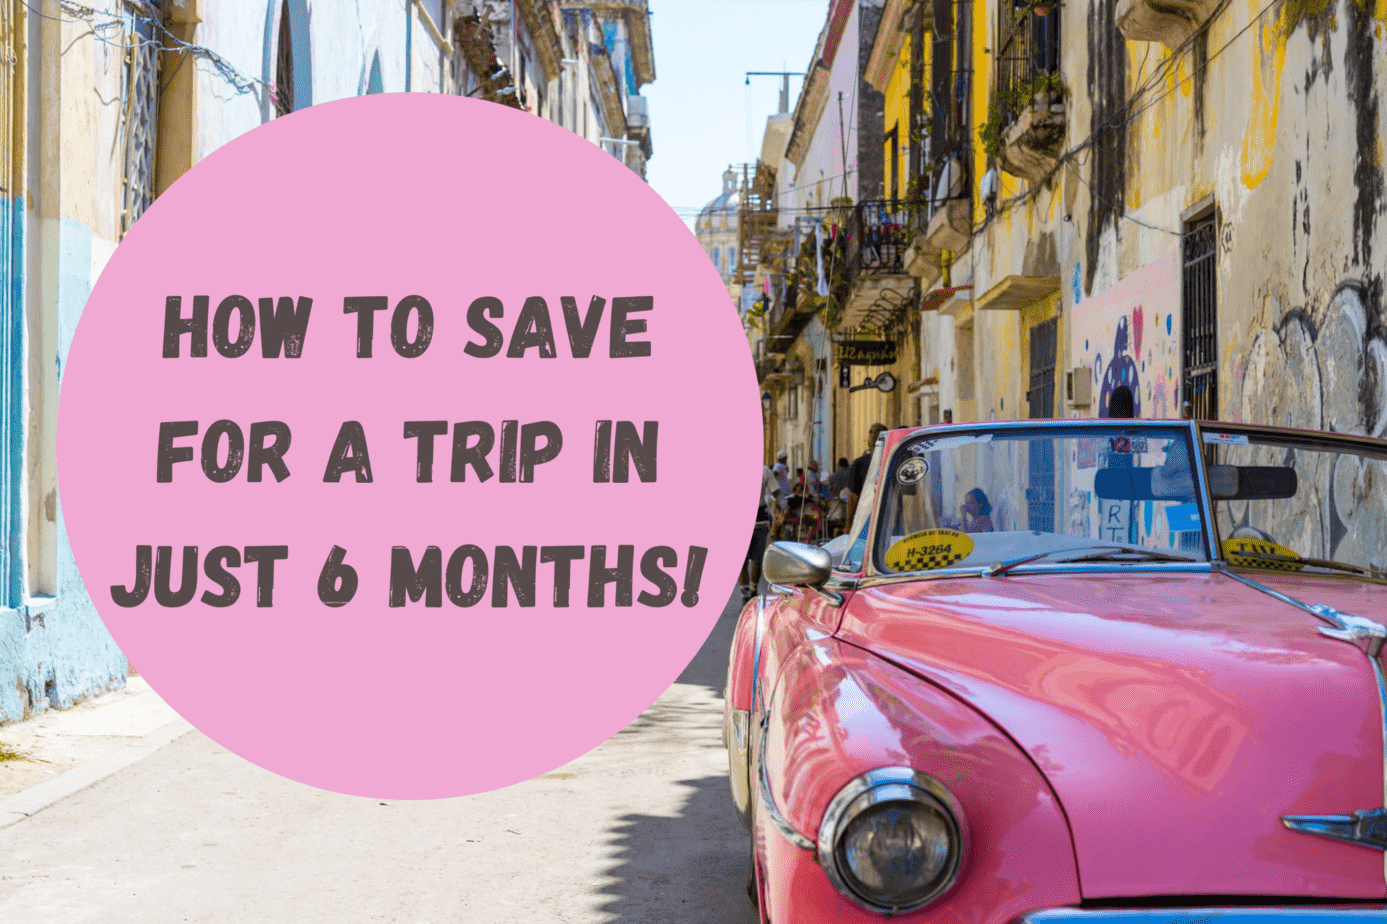 How to Save for a Trip in just 6 Months